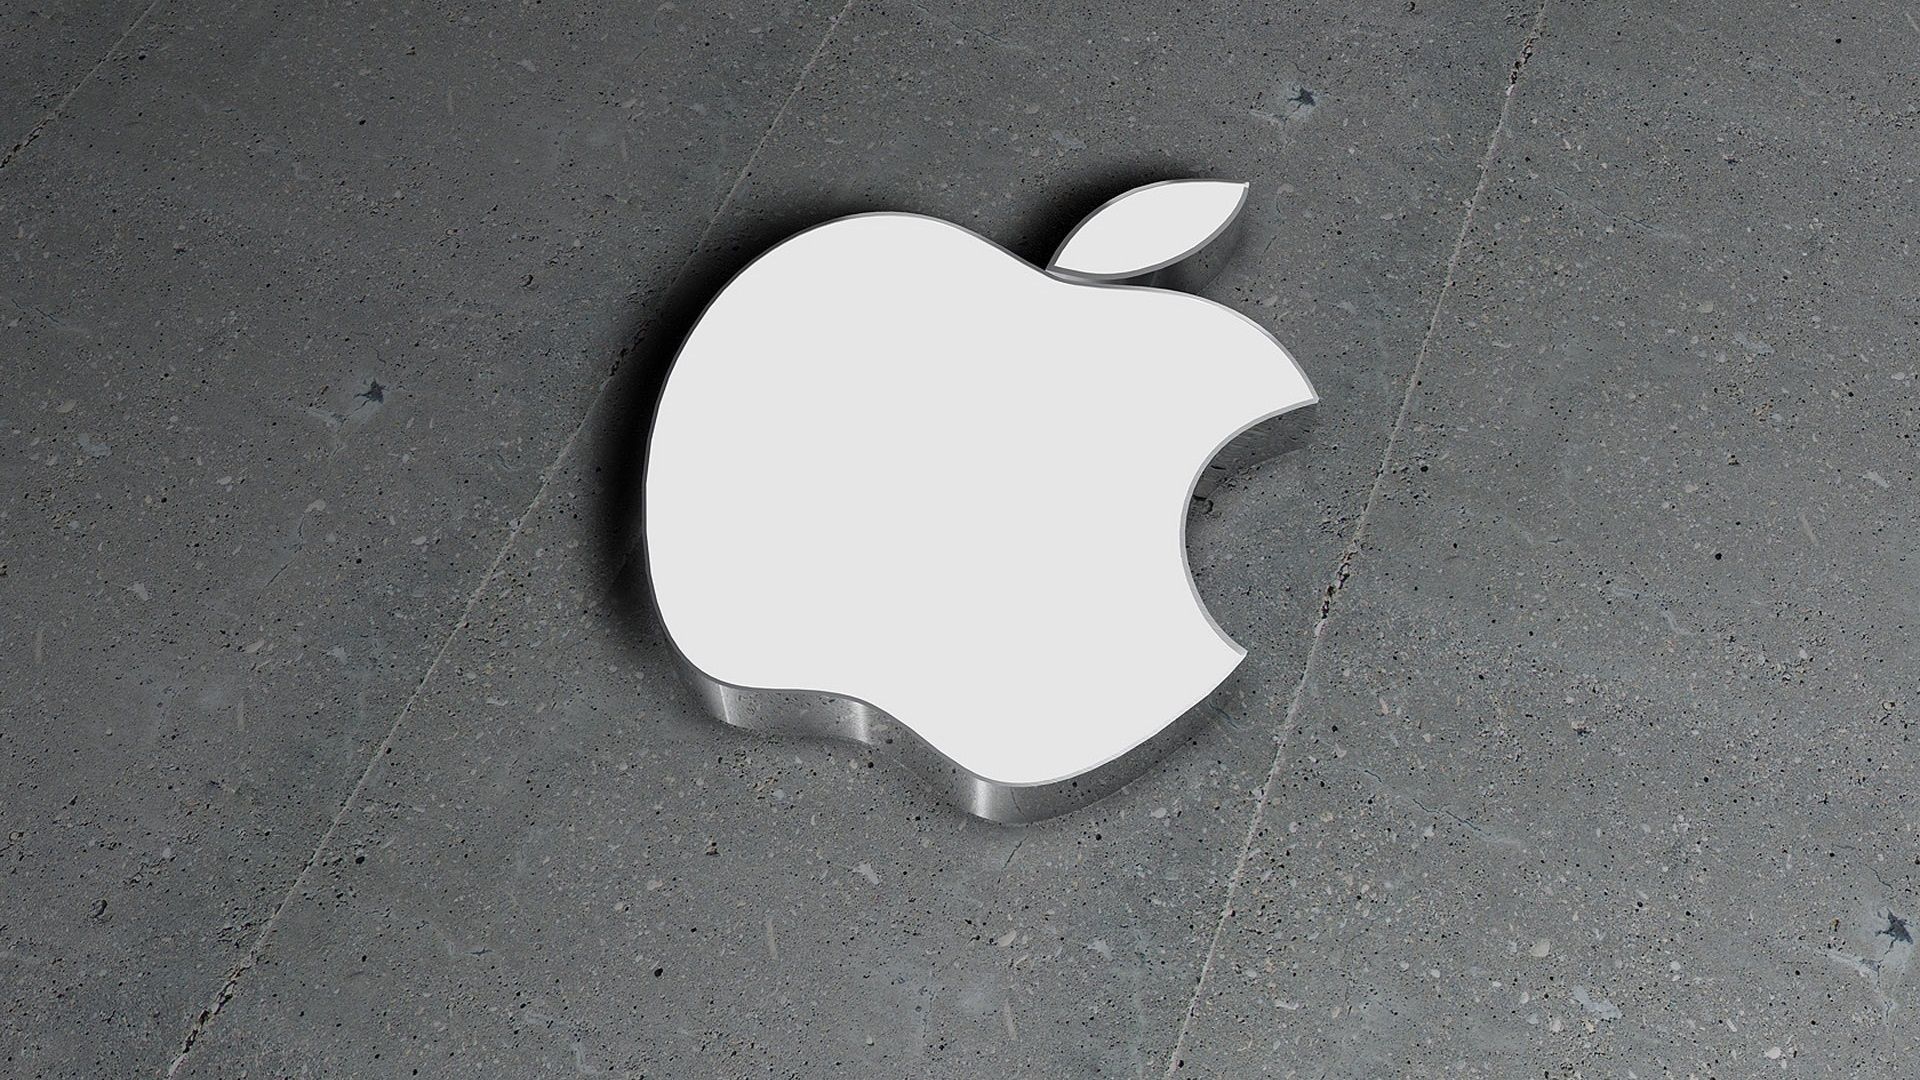 Show Your Apple Pride with These Wallpapers